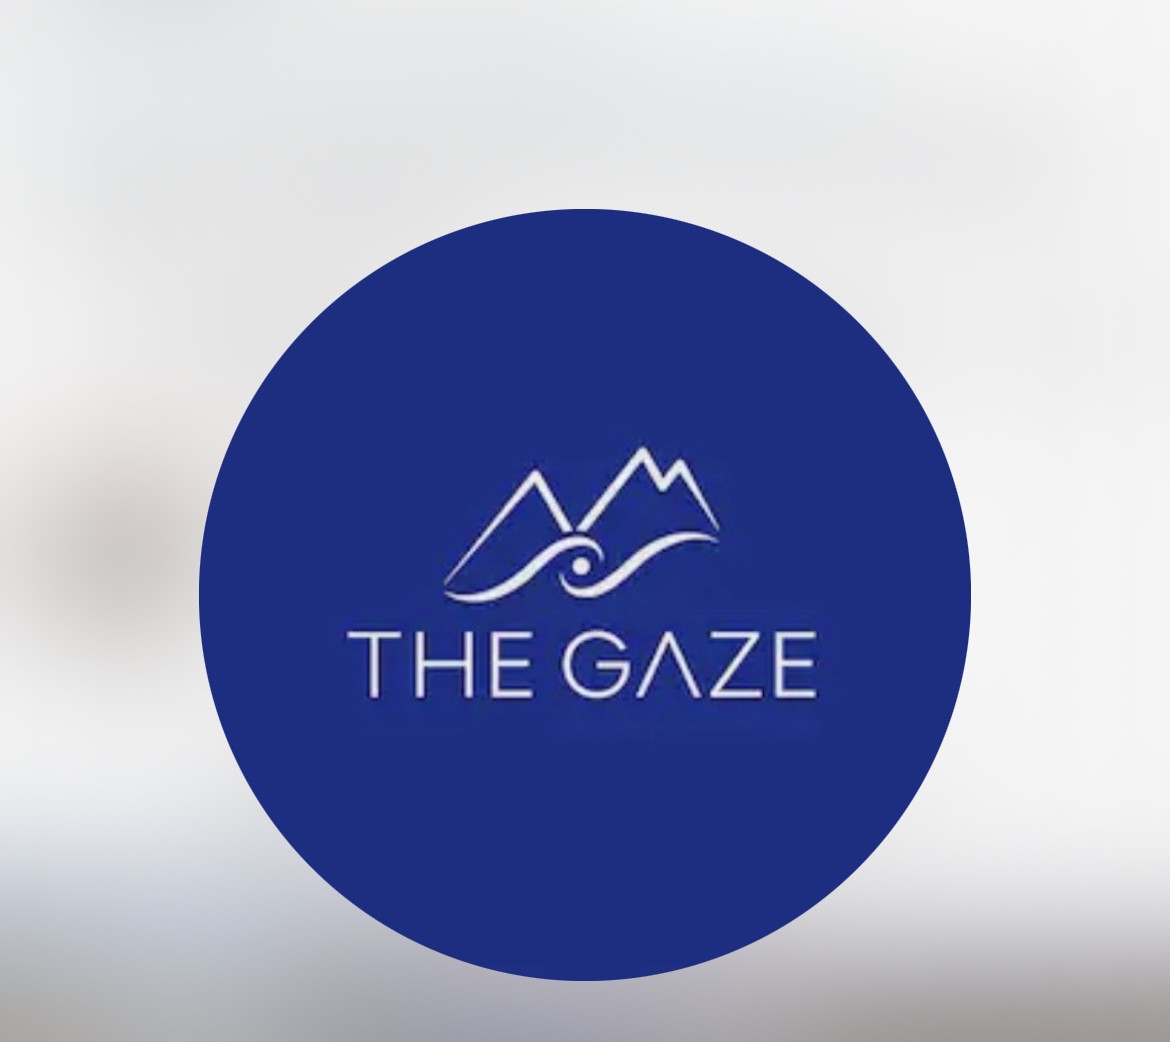 The Ganze: Empowering Langtang Valley and Himalayan through Local Products